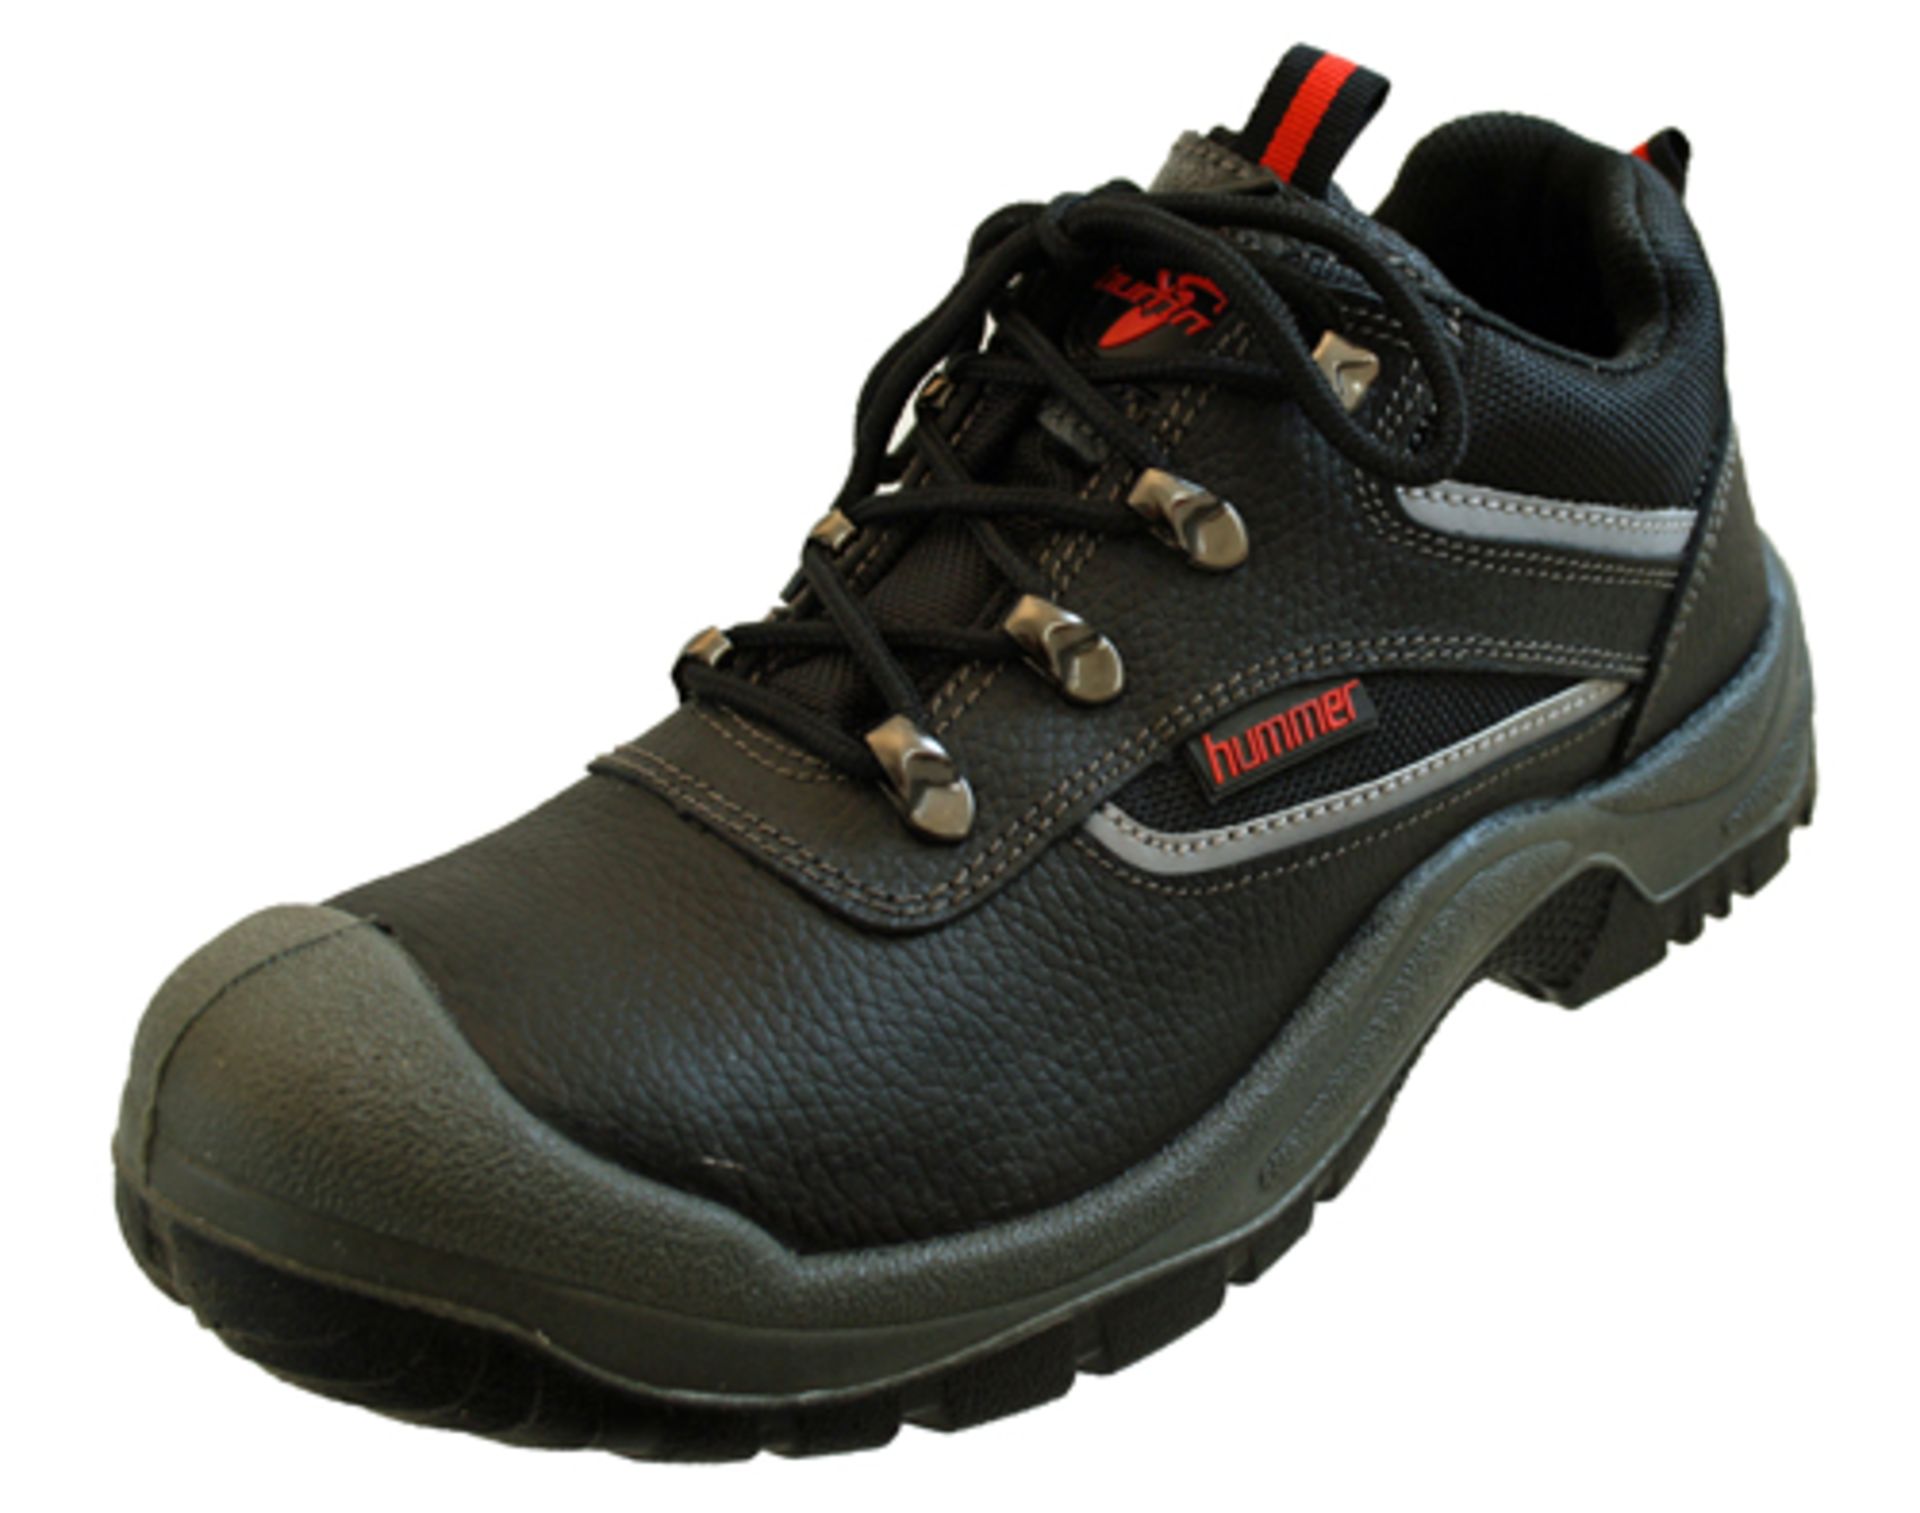 V Brand New Hummer HI-Tech safety shoes/size 7/ NOTE: Item Is Available Approx 5 Days From End Of